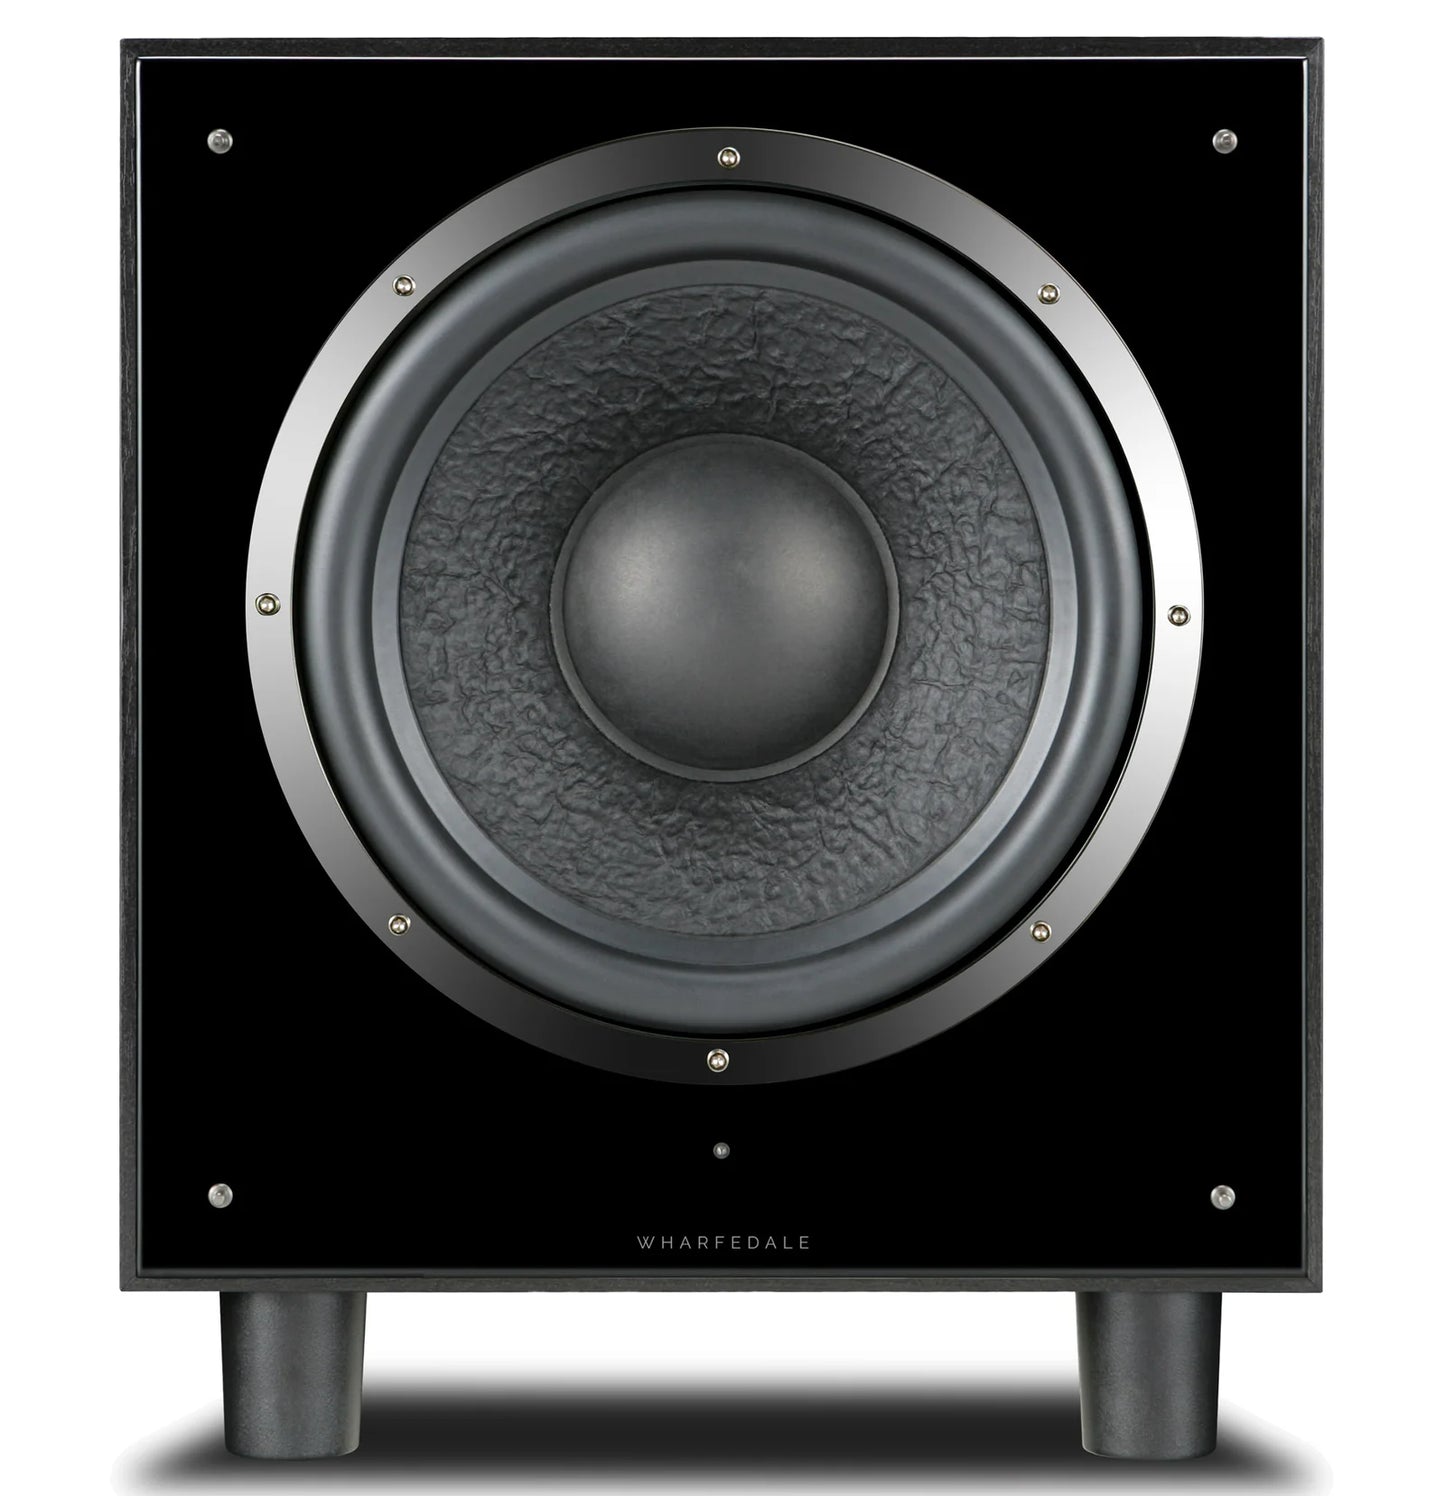 Wharfedale SW10- 200W, 10 inch Ported Long throw subwoofer